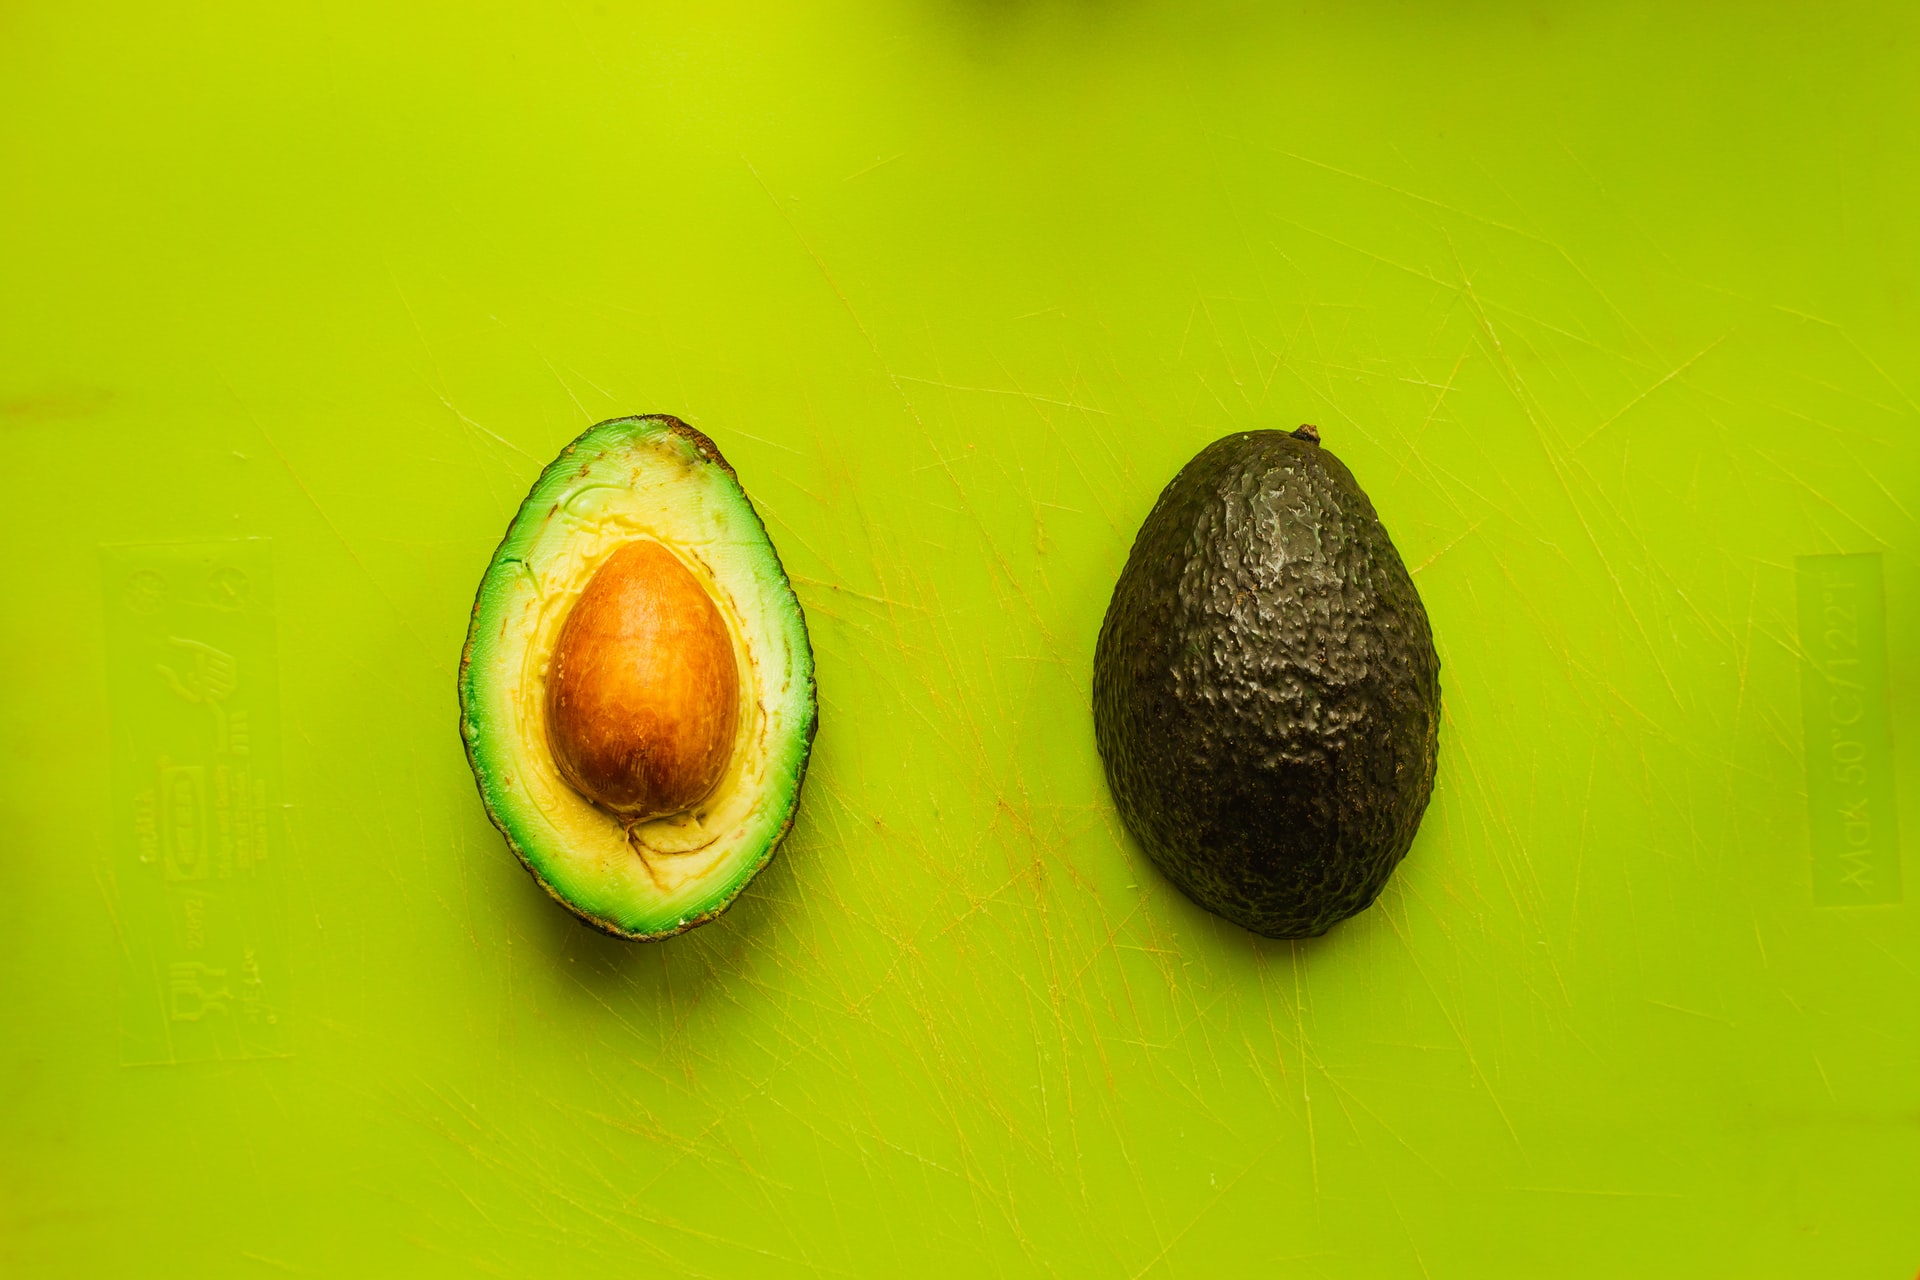 How to Plant Your First Avocado During Quarantine 5